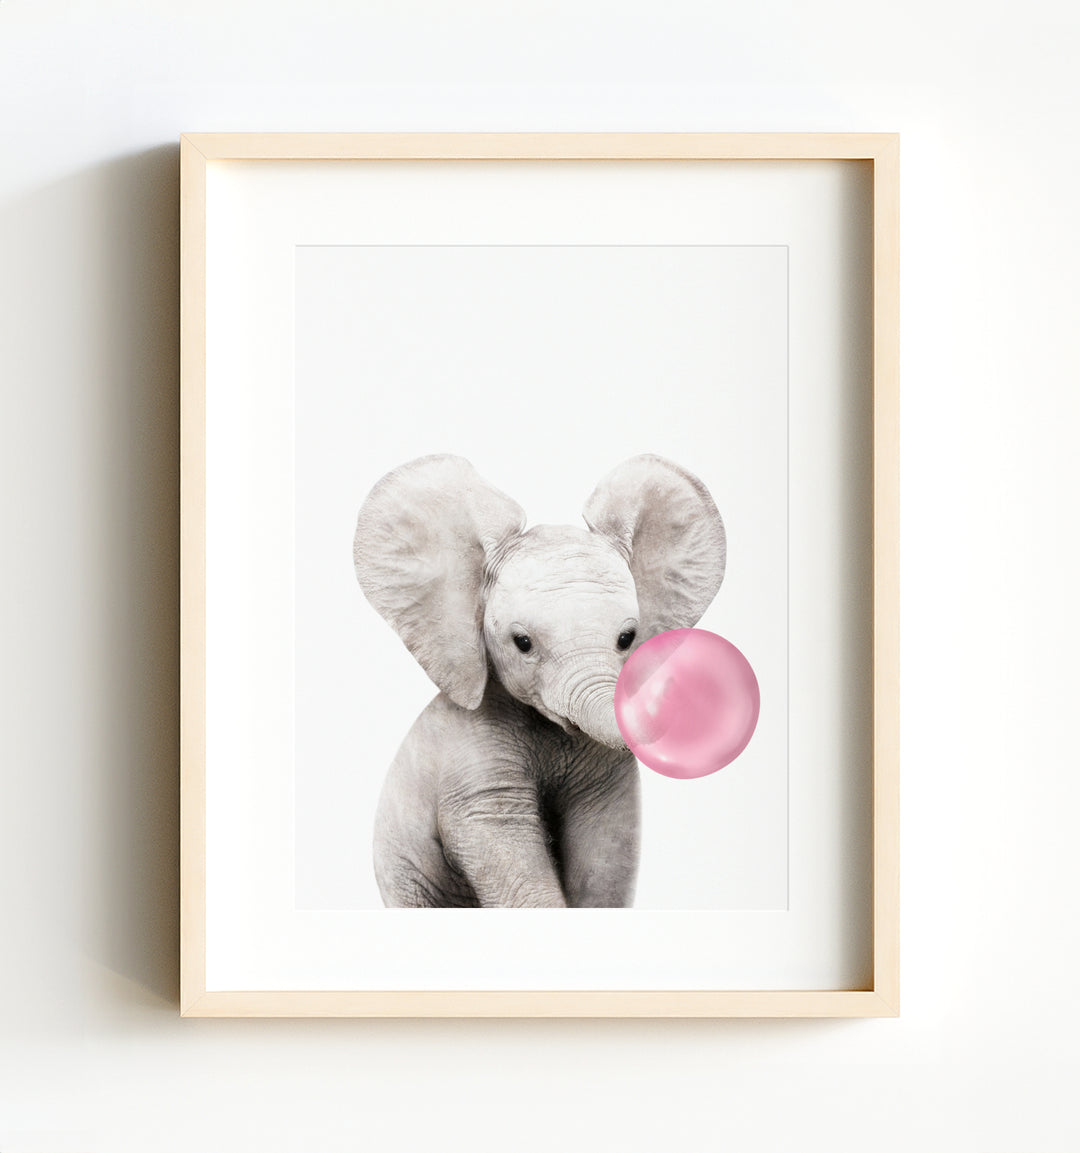 Baby Elephant - The Crown Prints